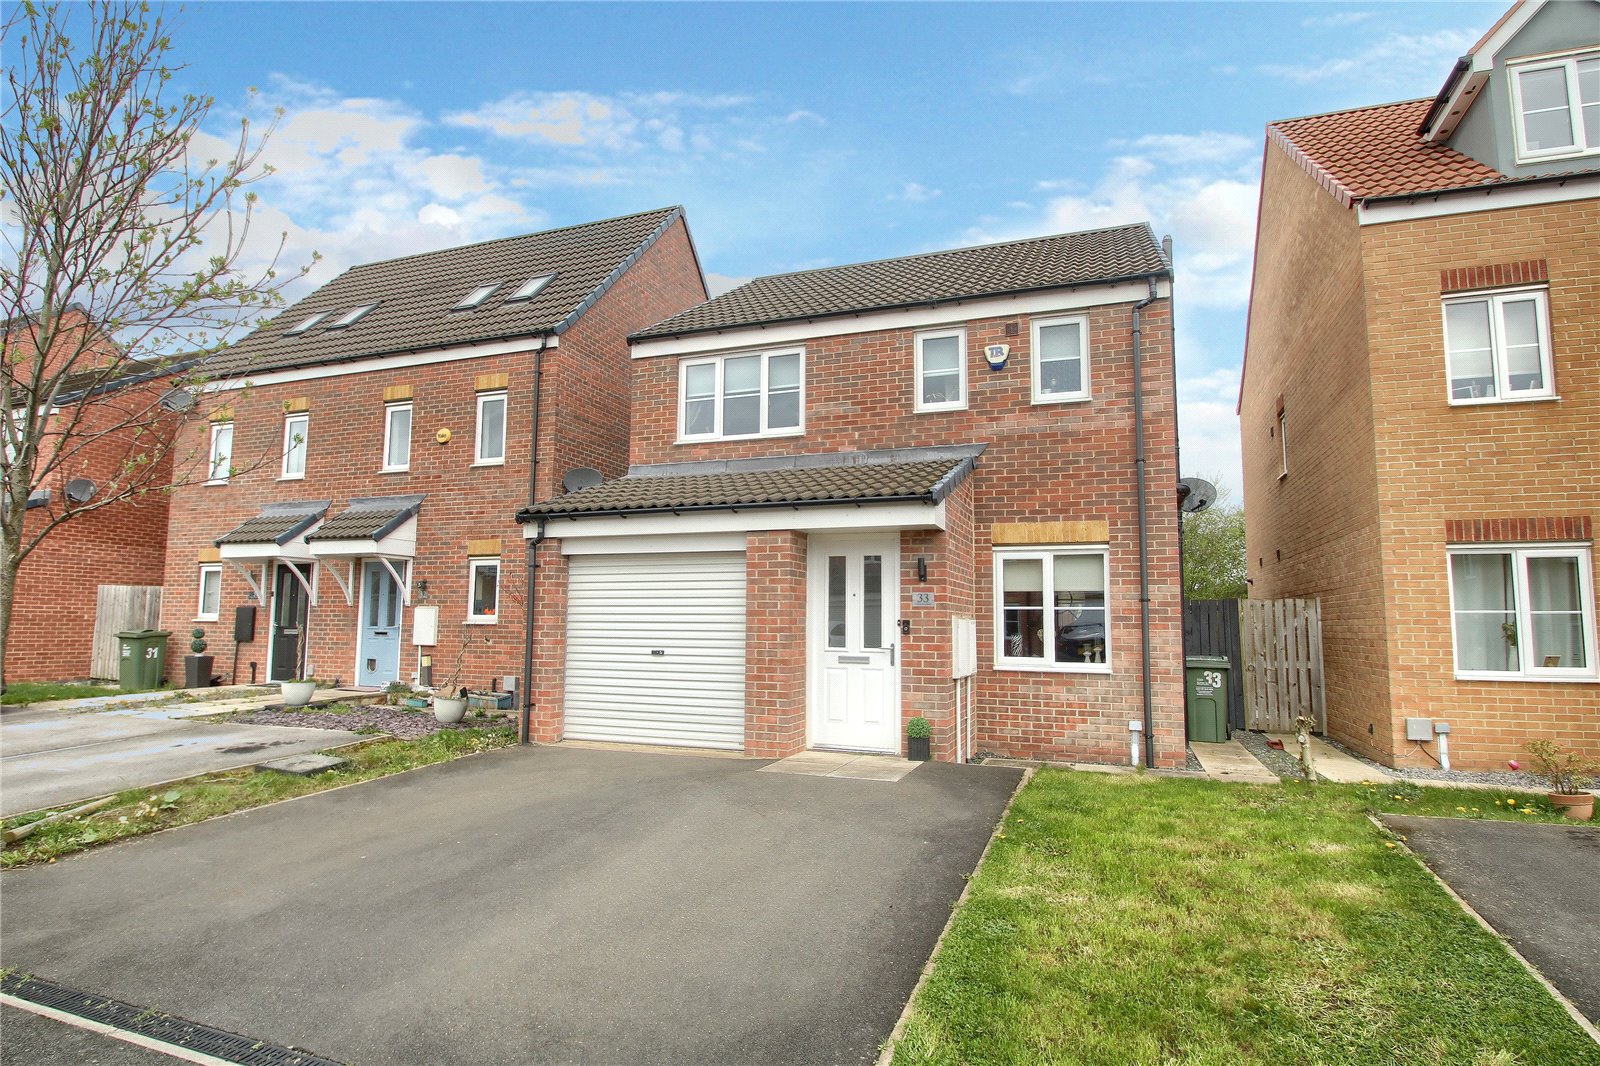 3 bed house for sale in Bancroft Drive, Ingleby Barwick - Property Image 1